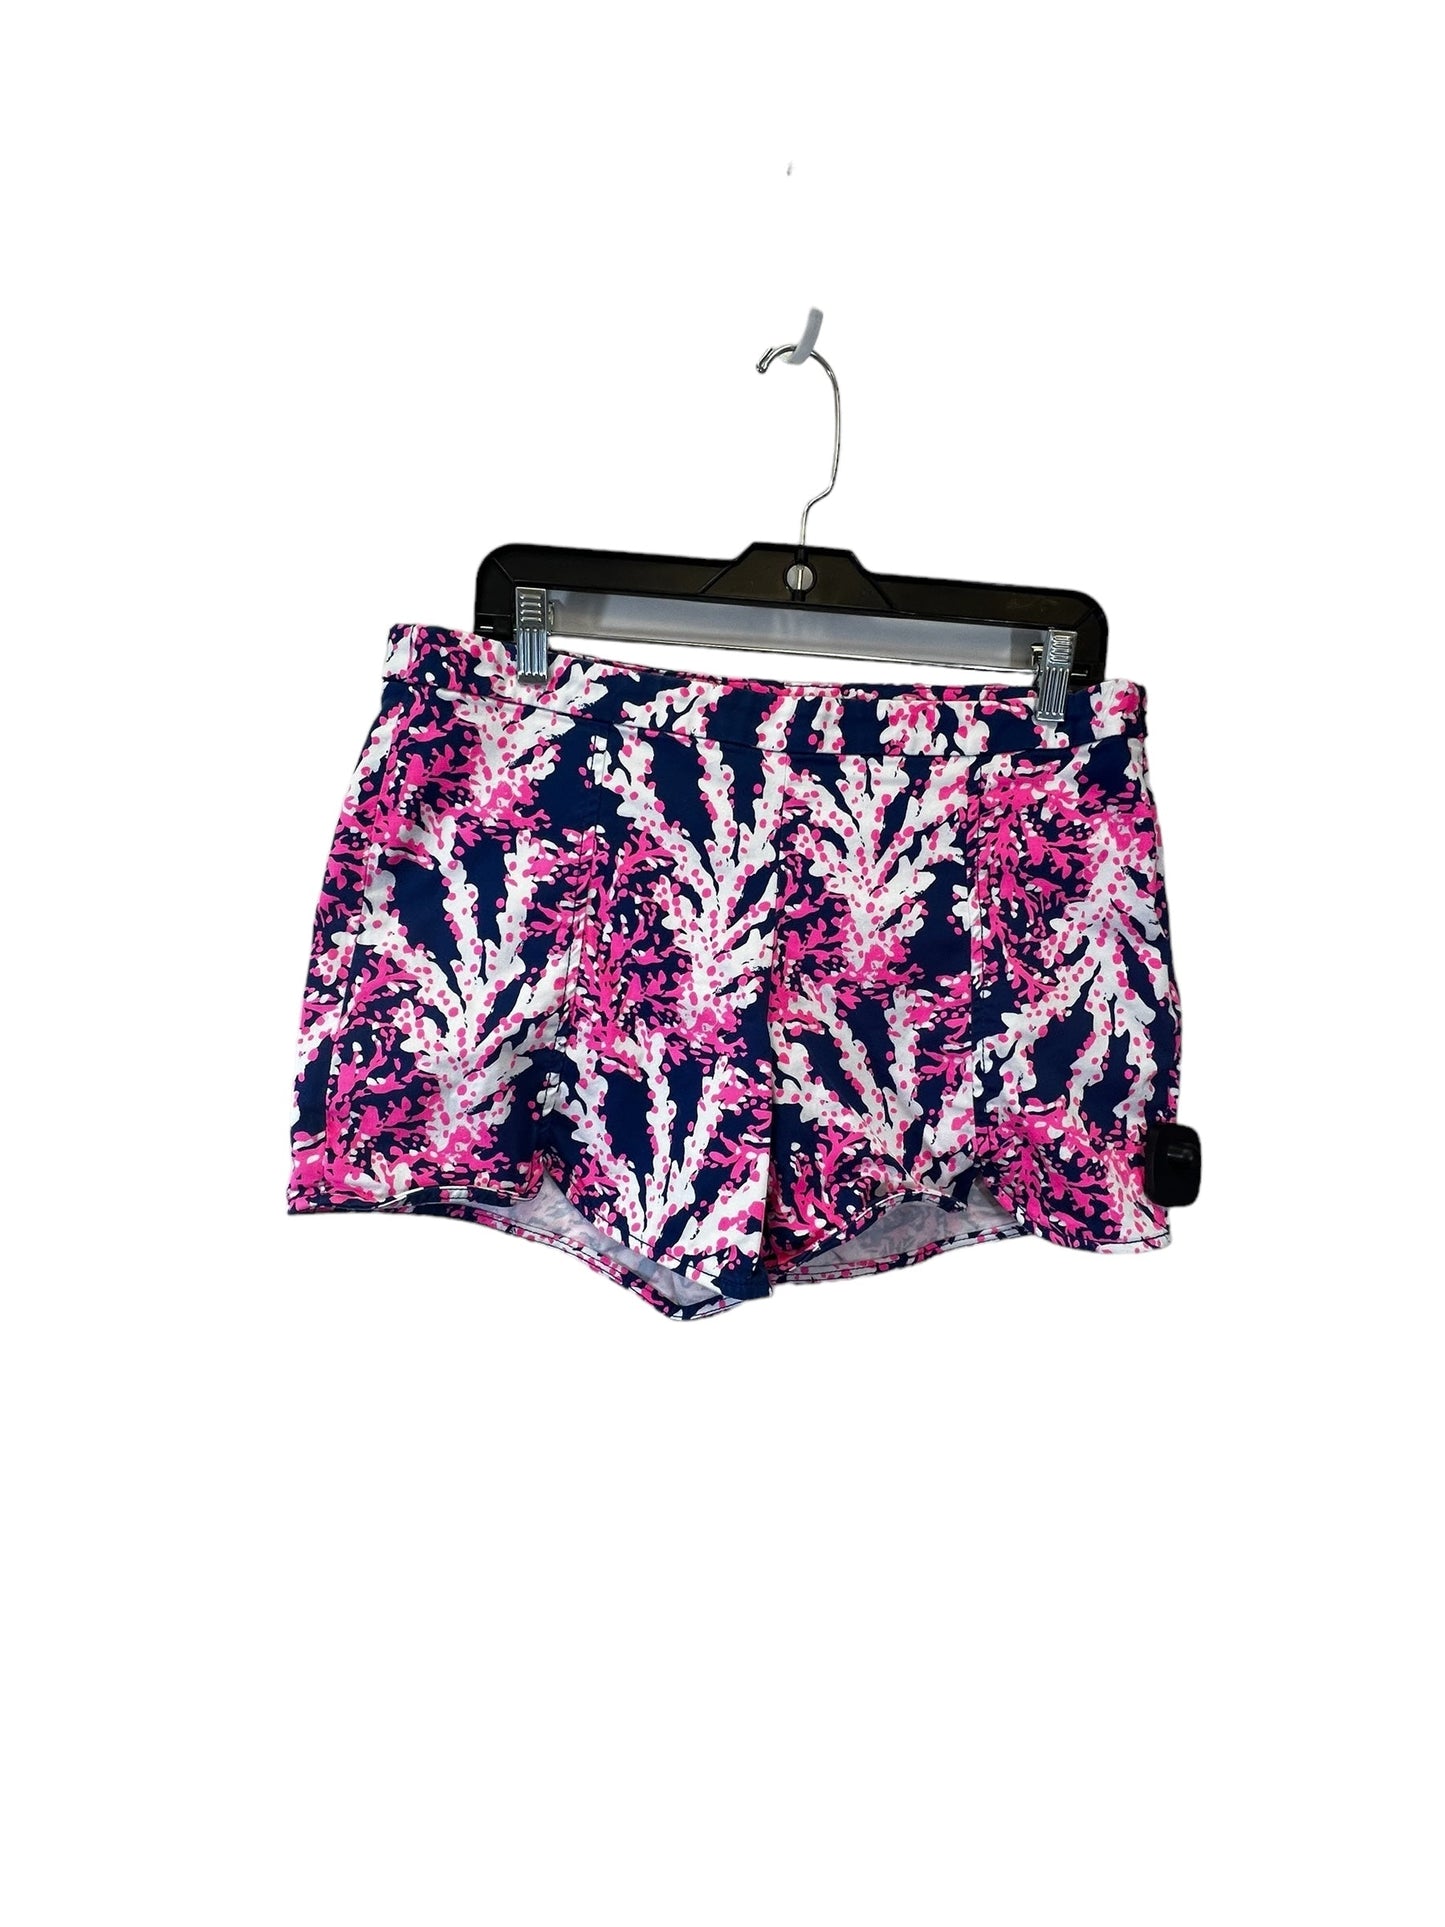 Blue & Pink Shorts Lilly Pulitzer, Size 10